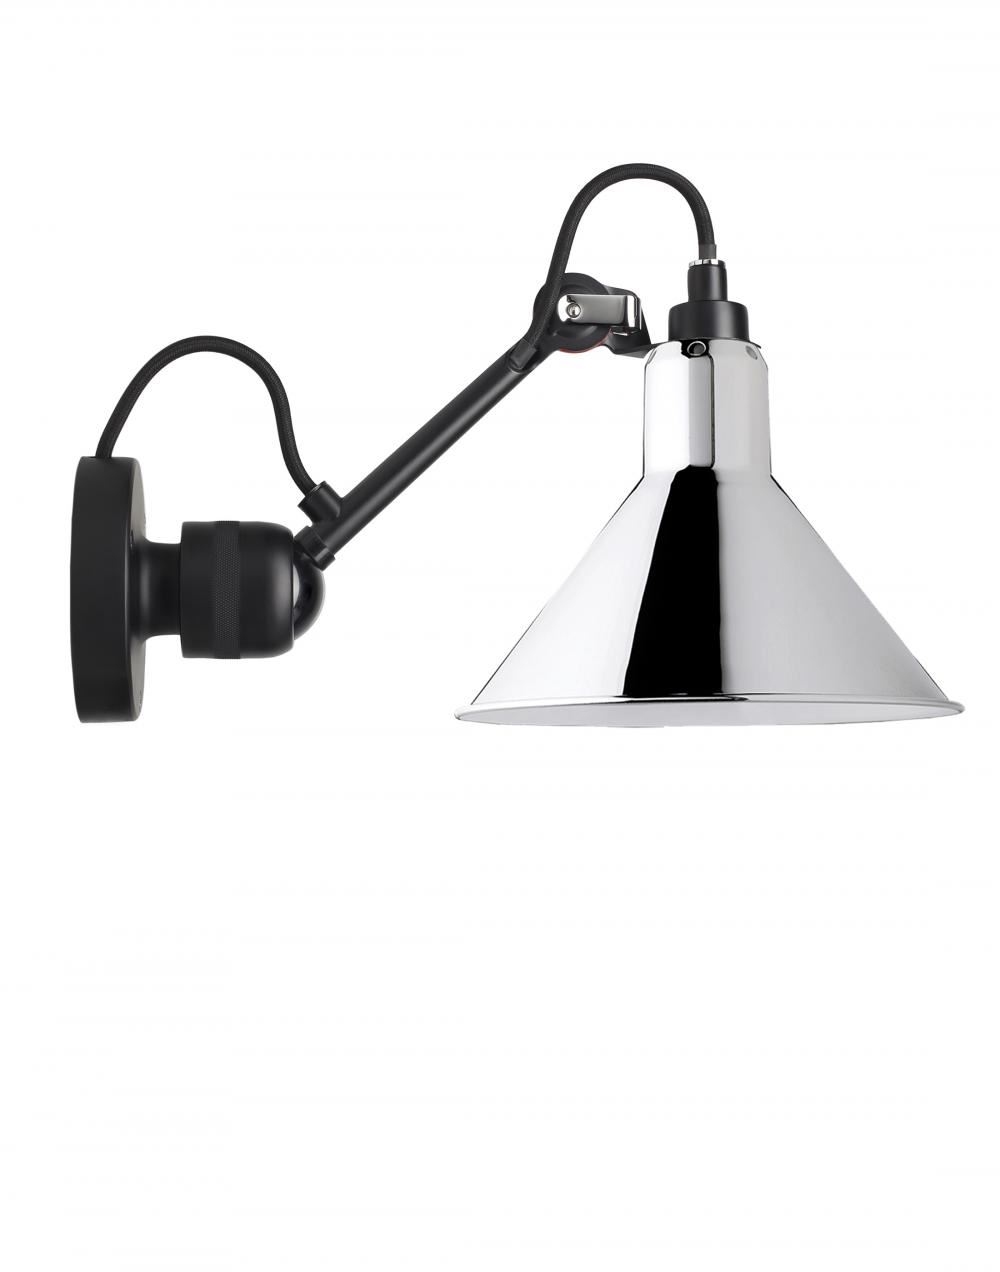 Lampe Gras 304 Small Wall Light Black Arm Chrome Shade Conic Hardwired